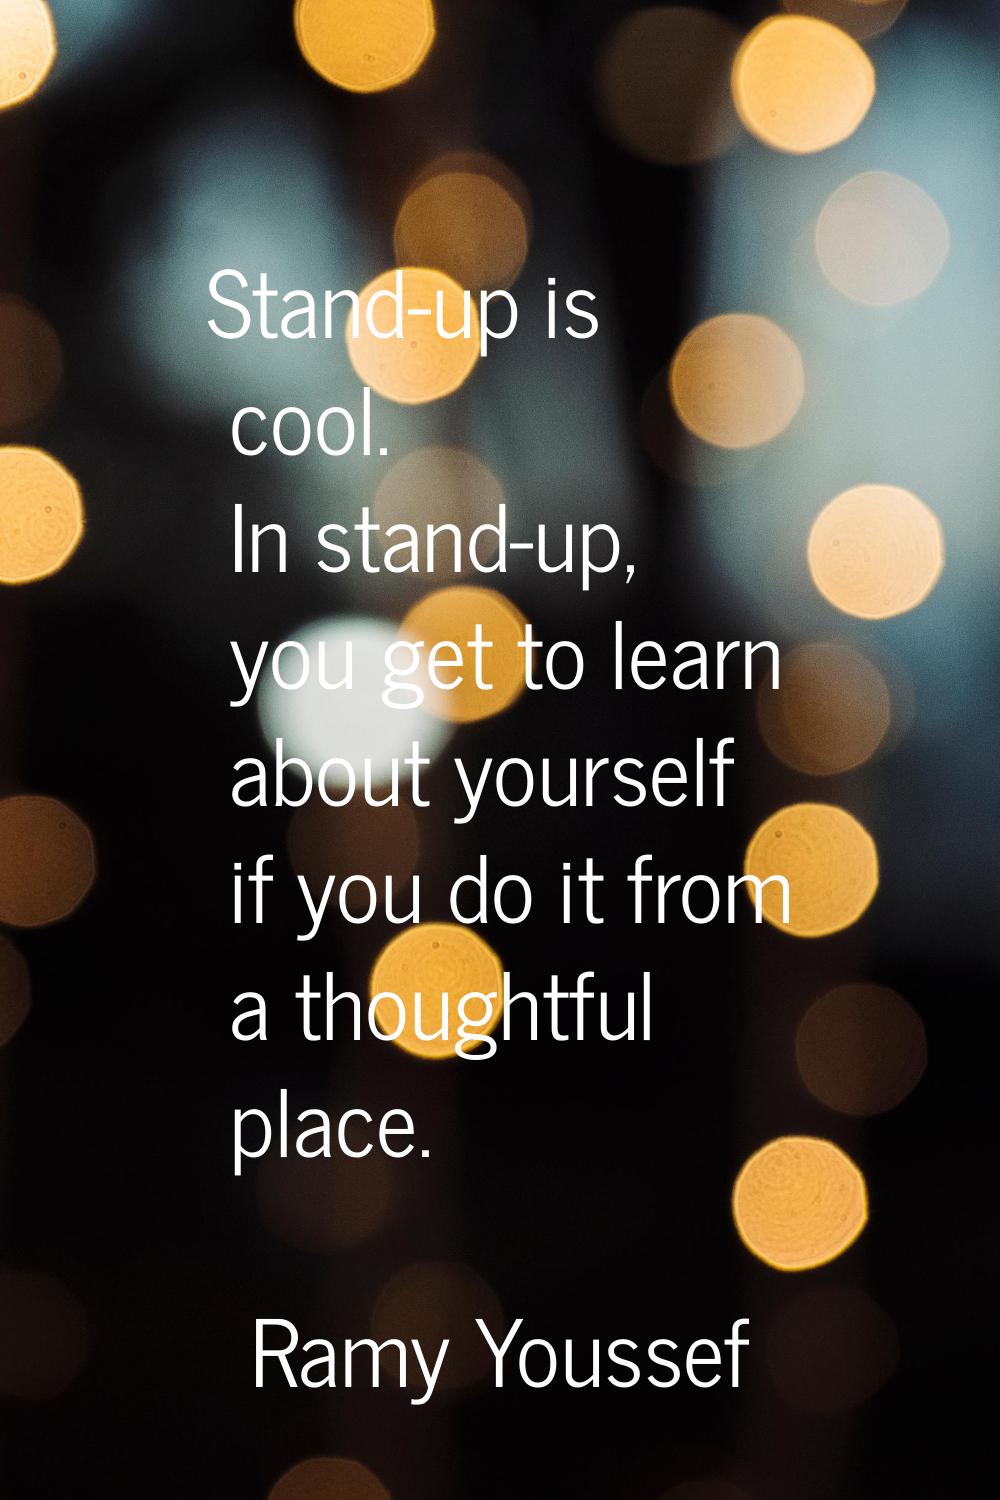 Stand-up is cool. In stand-up, you get to learn about yourself if you do it from a thoughtful place